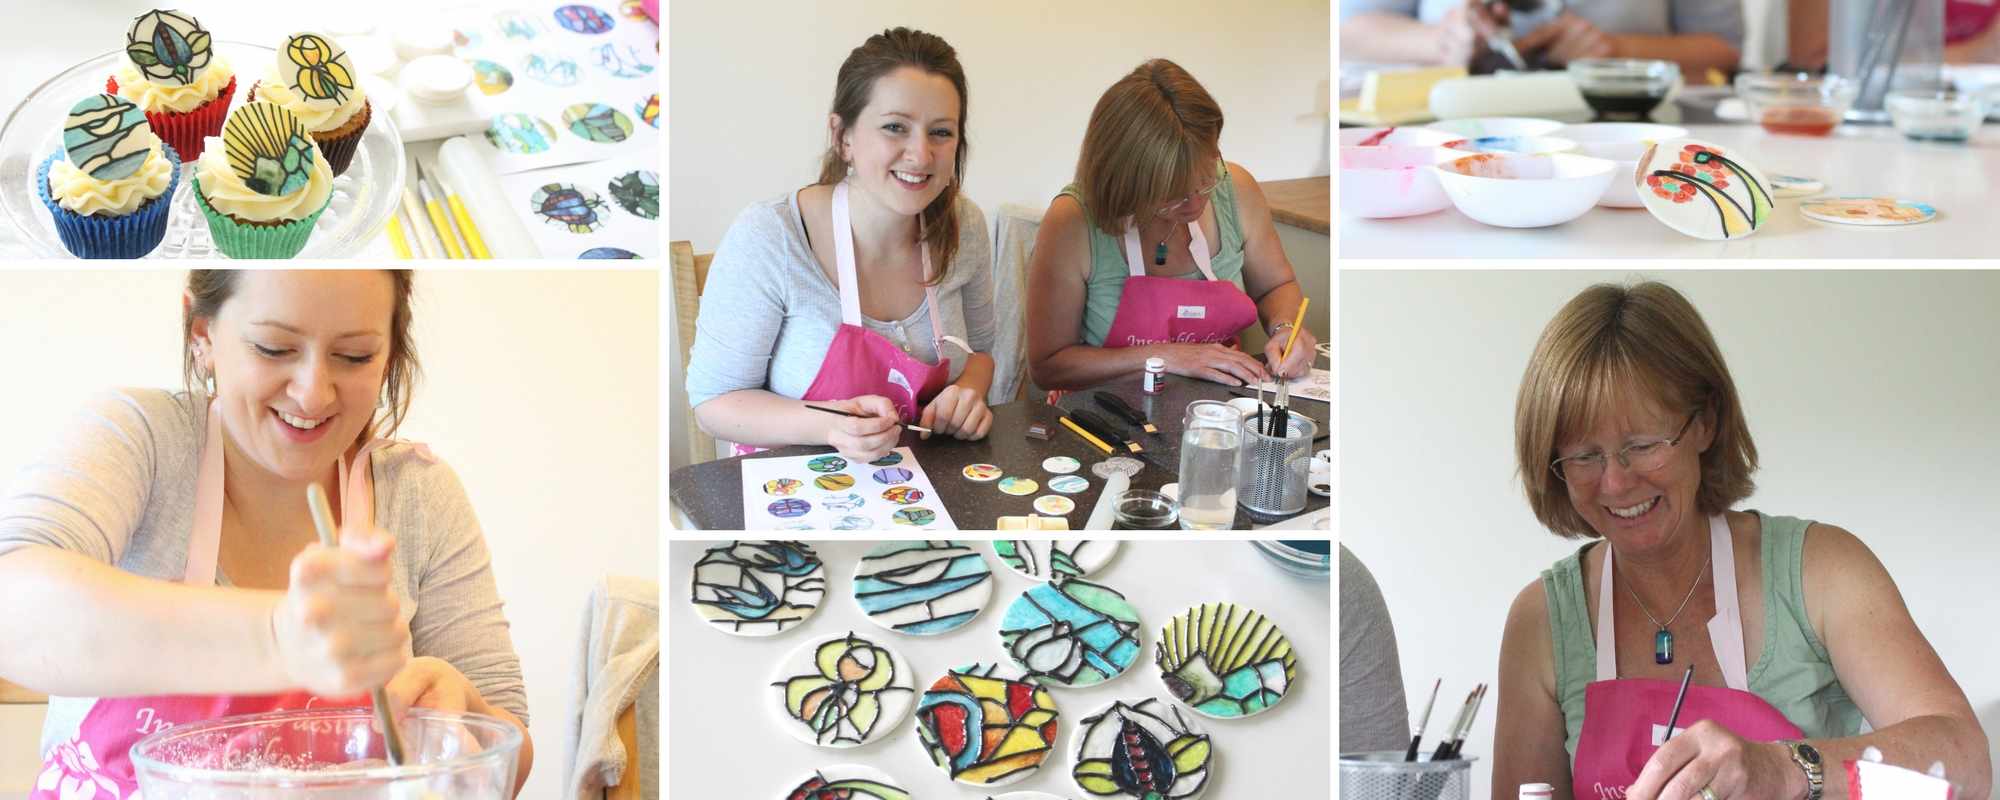 Bespoke cake decorating workshops - Mum and daughter cake decorating technique class - creating stained glass in sugar